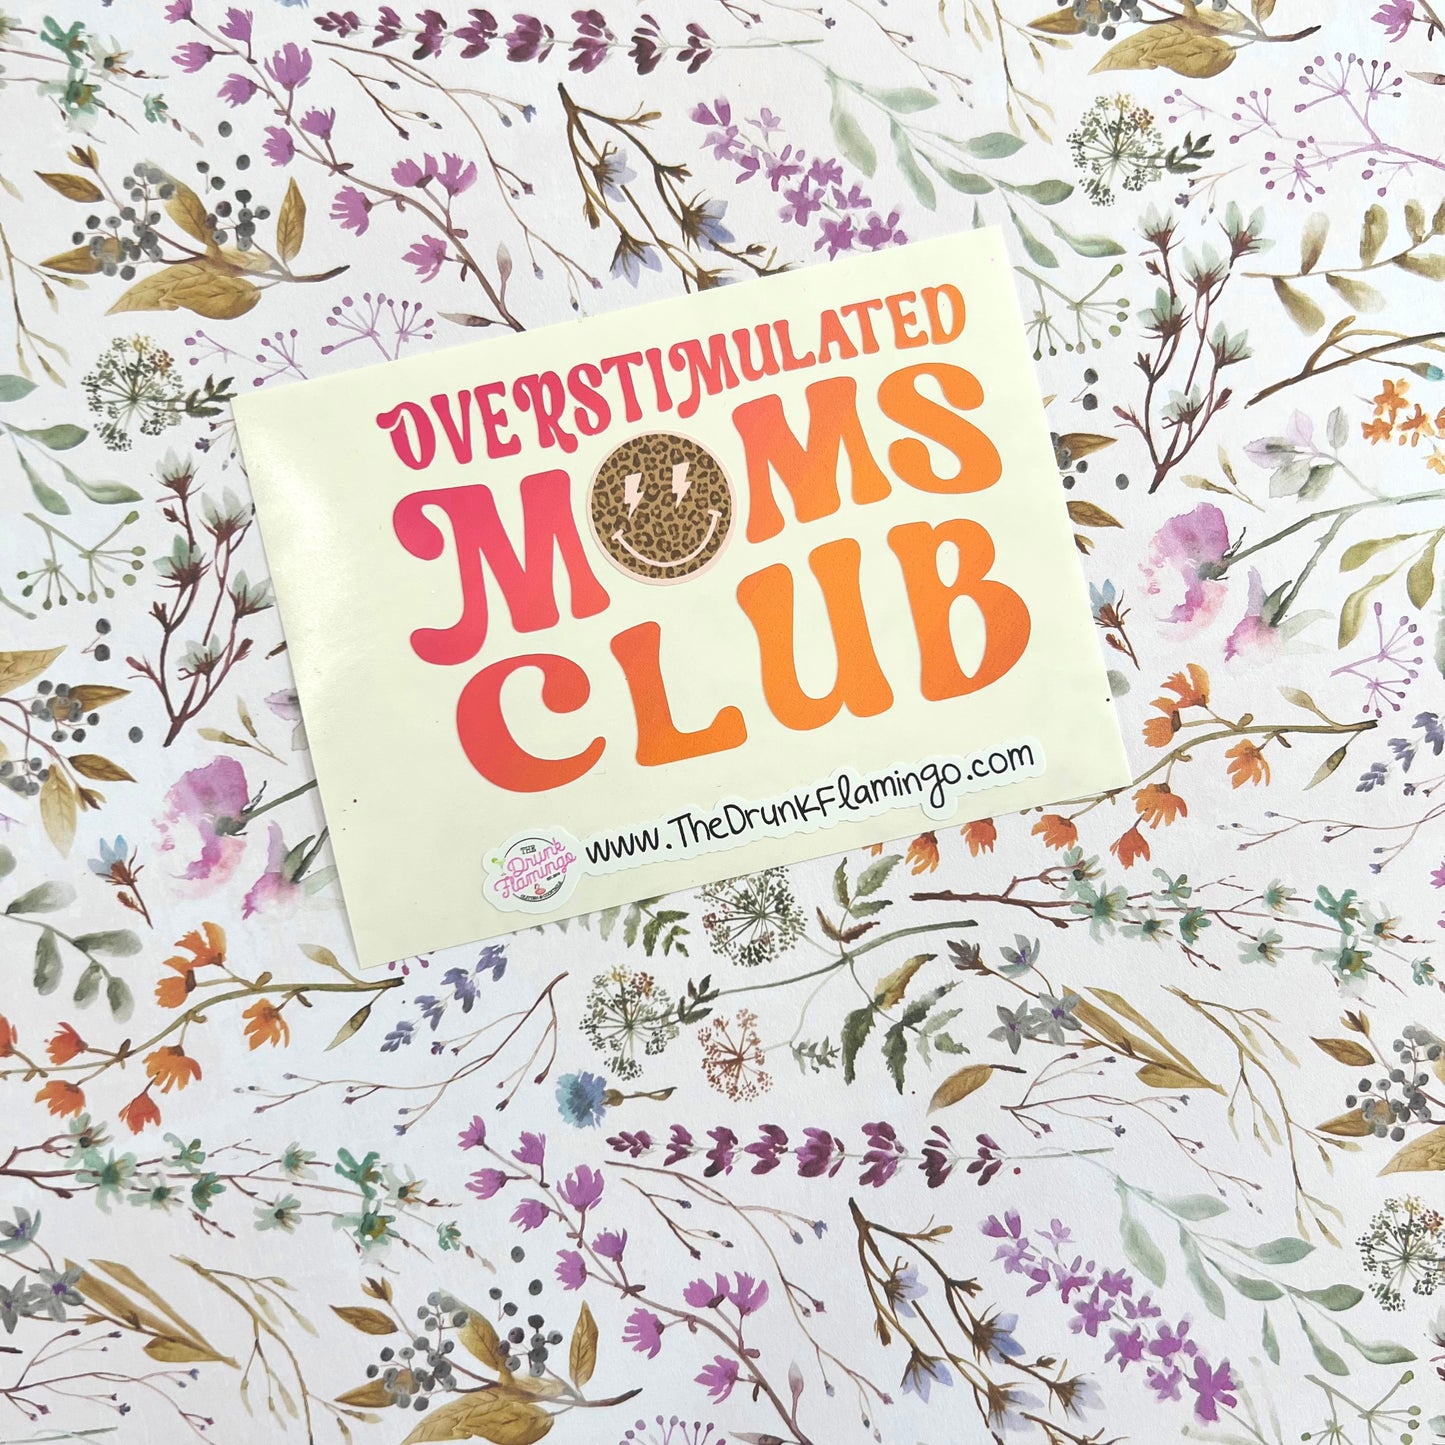 22- Overstimulated moms club WHITE backed vinyl decal